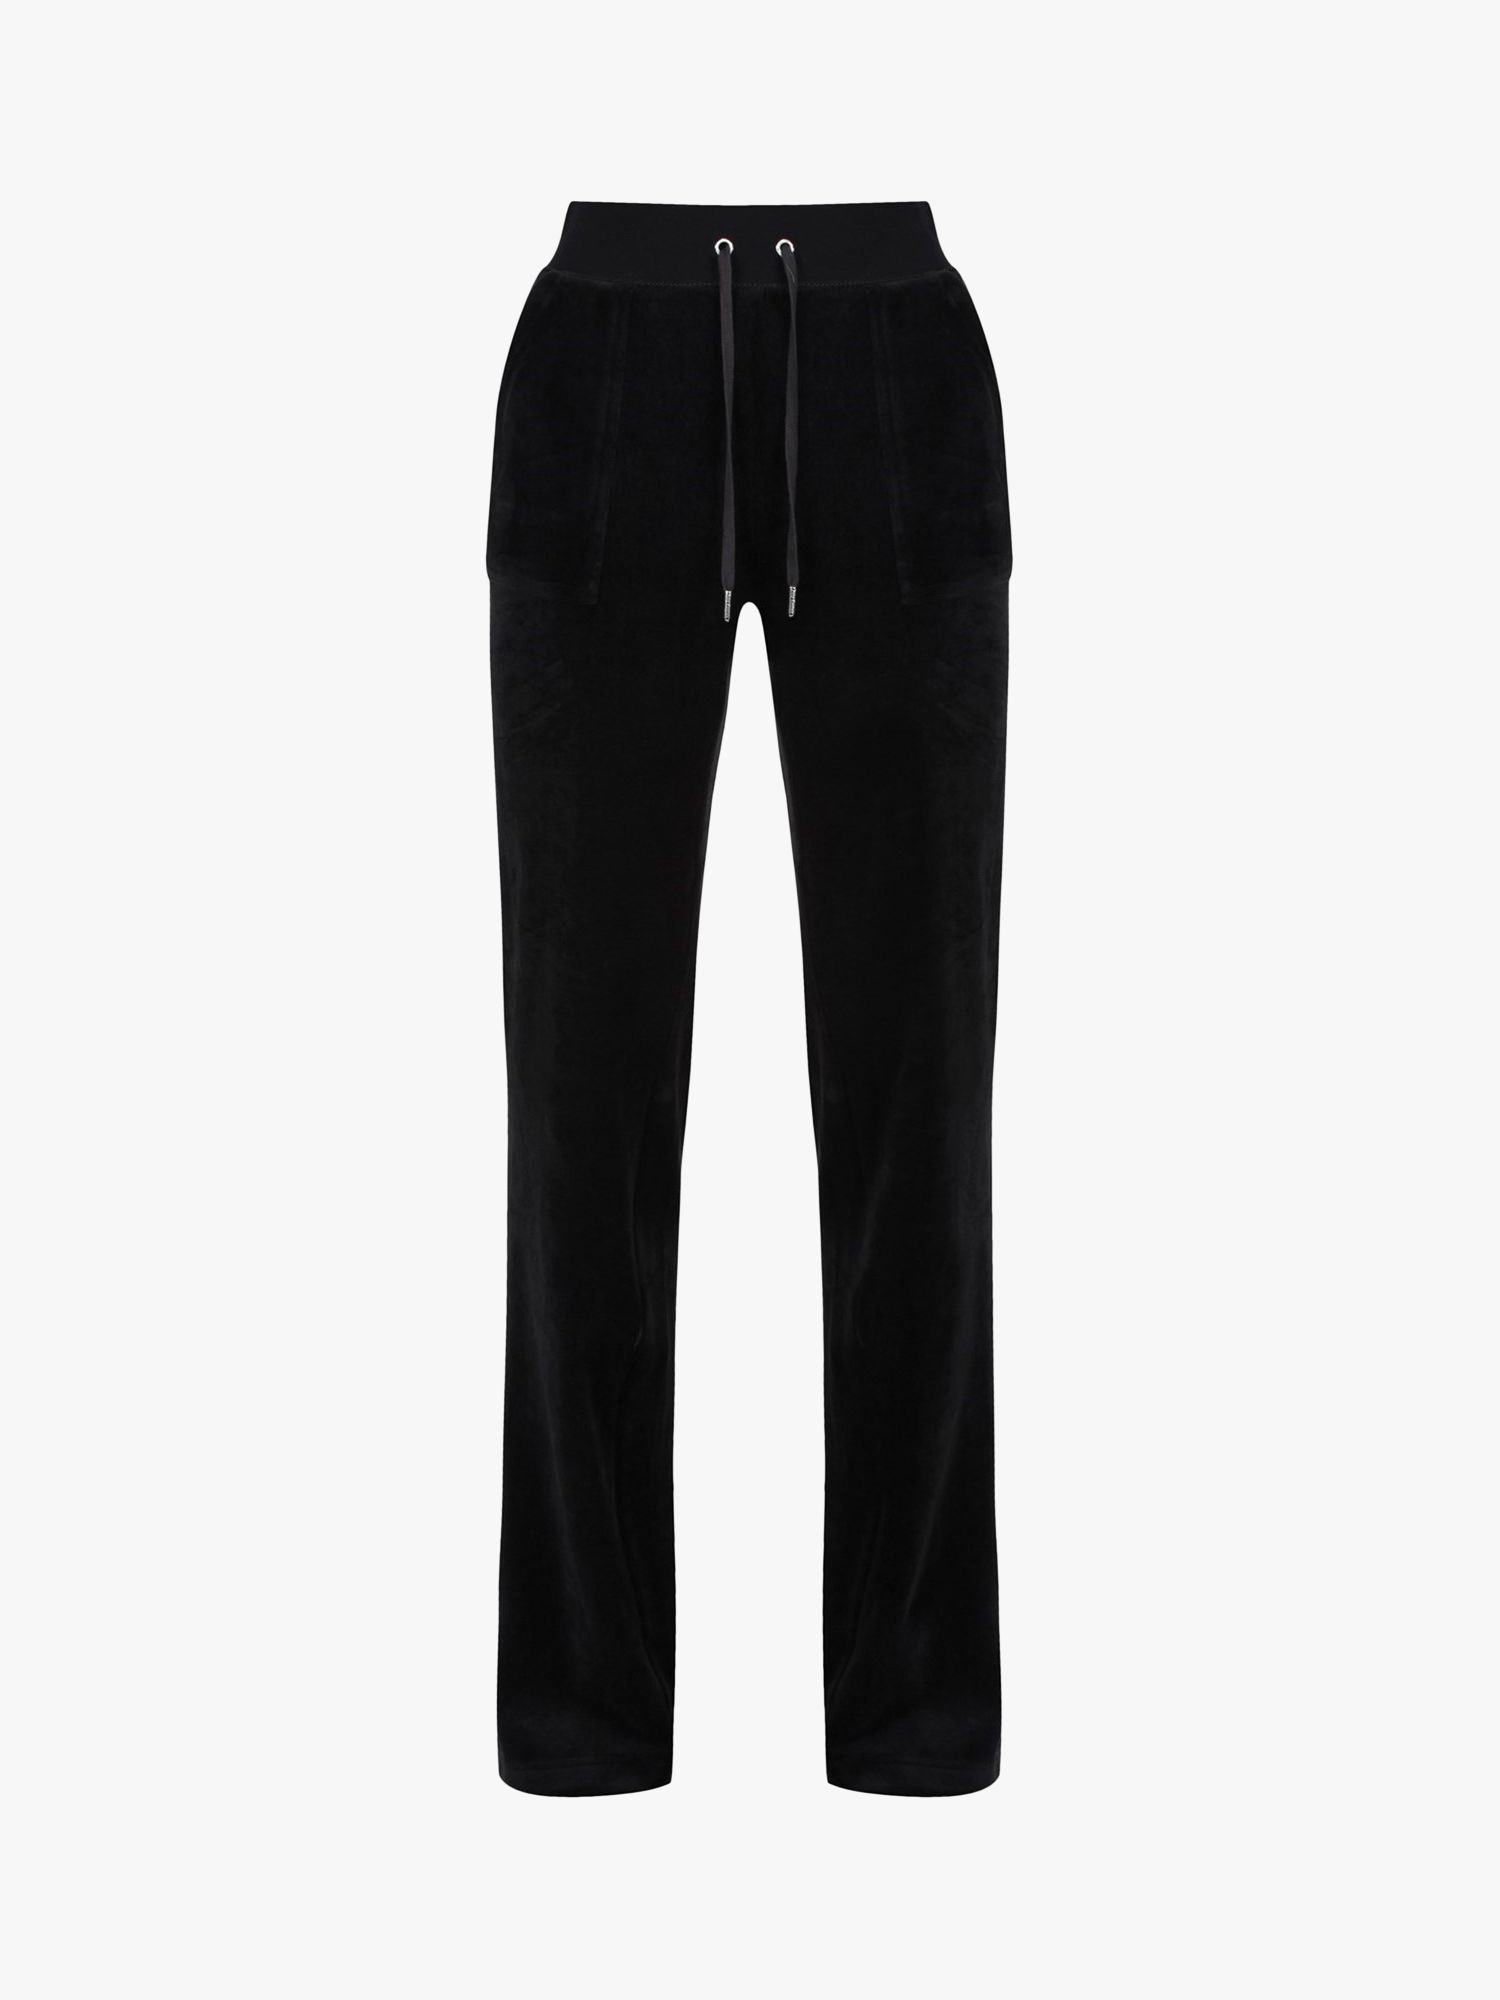 Juicy Couture Sport Skinny Workout Pants in Black